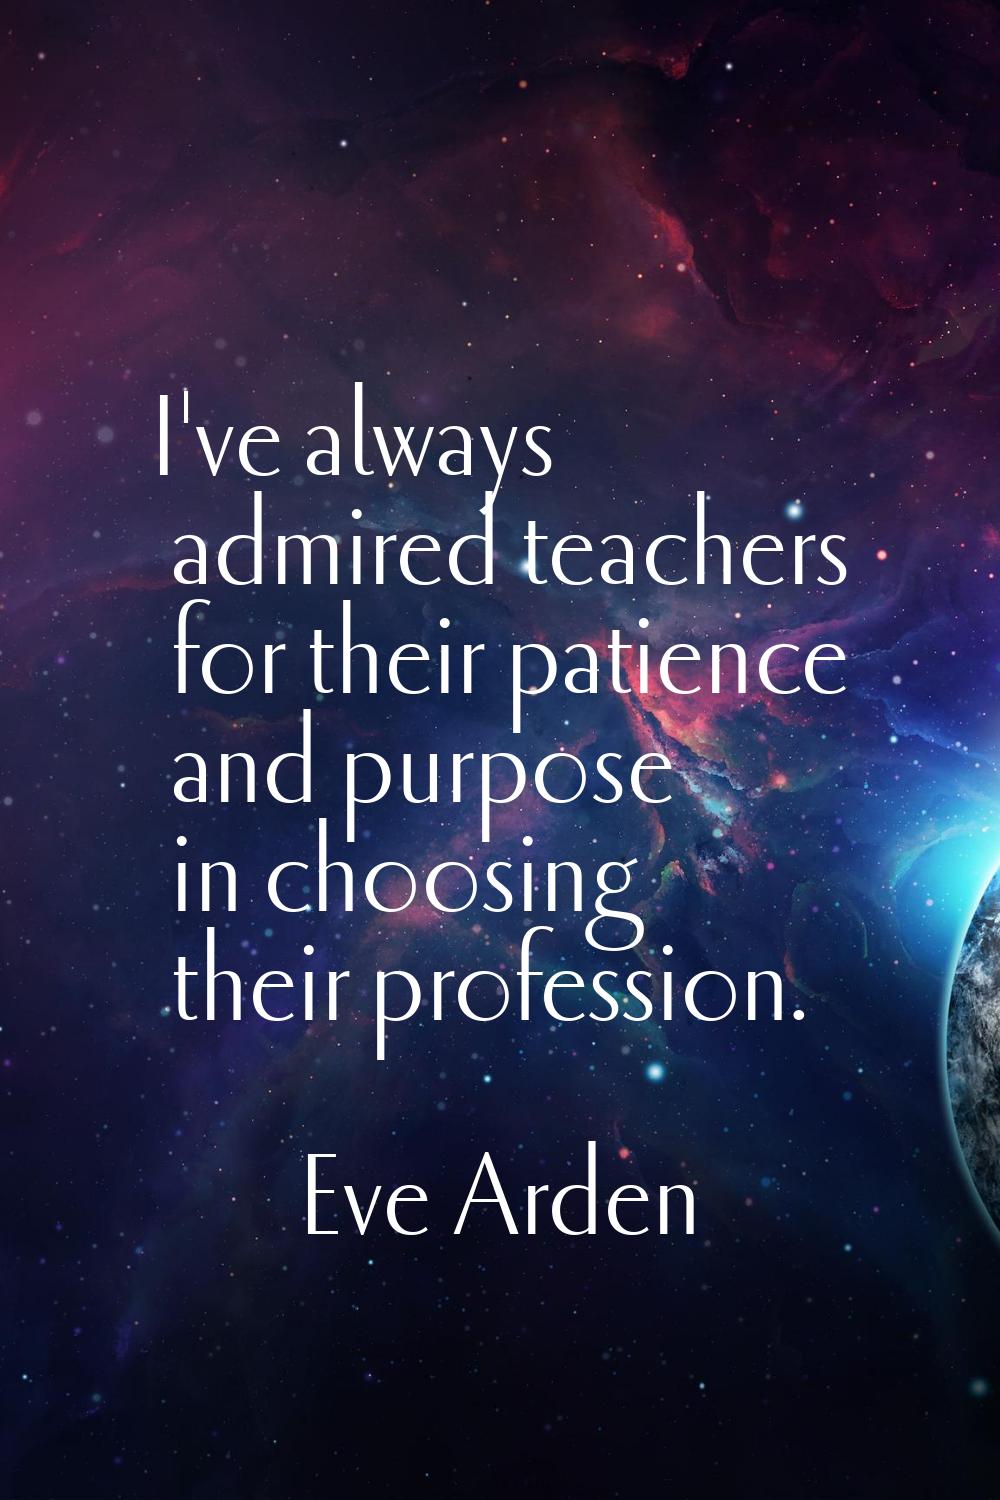 I've always admired teachers for their patience and purpose in choosing their profession.